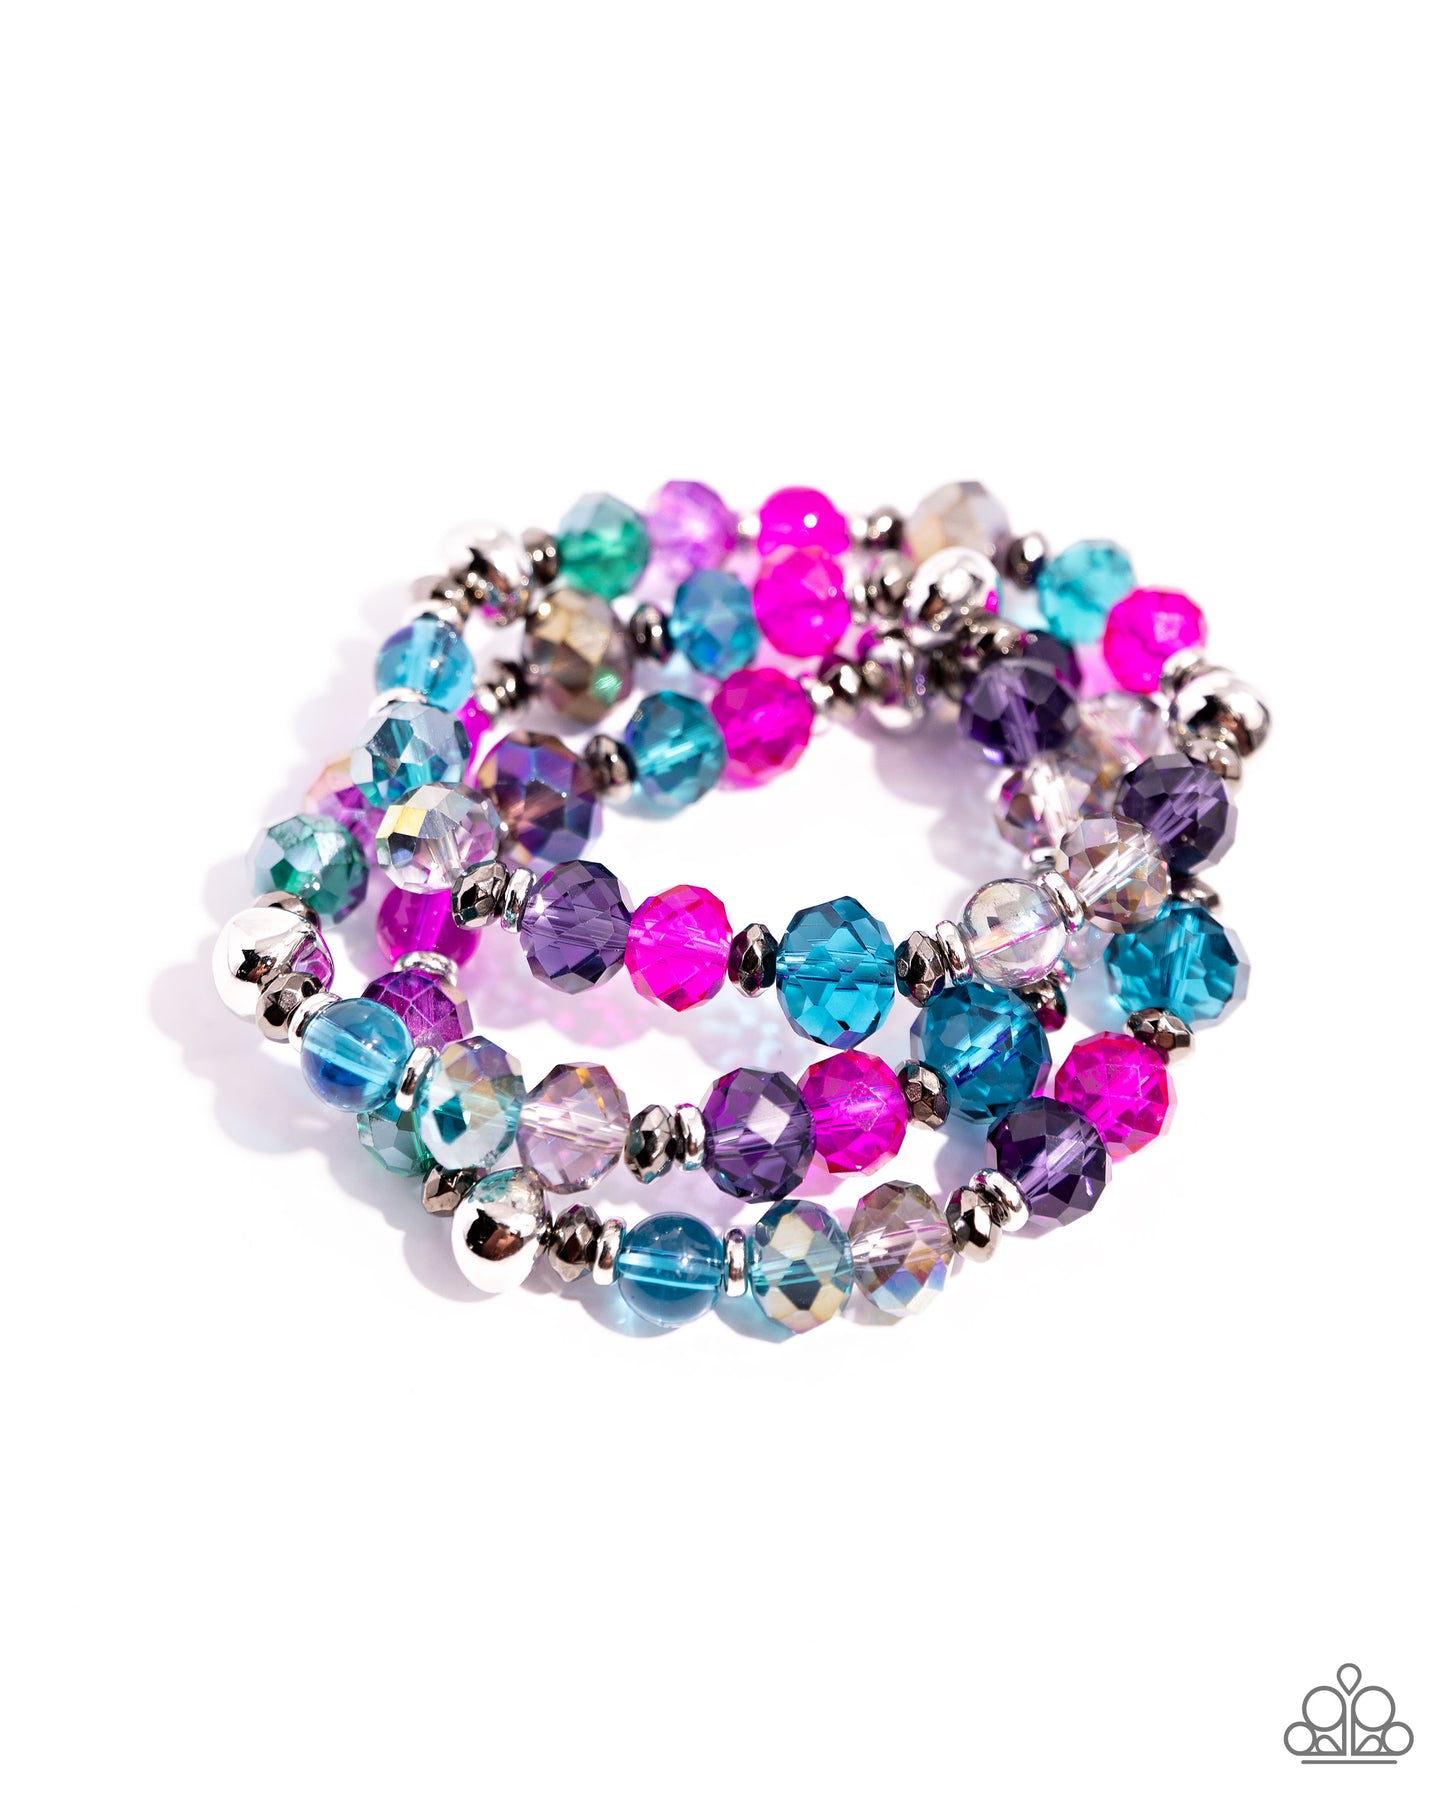 Stack of GLASS Multi Stretch Bracelet - Paparazzi Accessories Infused along elastic stretchy bands, a collection of highly-faceted multicolored beads in various shades and silver and gunmetal beads stack along the wrist for a pop of color. Sold as one set of three bracelets. SKU: P9RE-MTXX-160XX